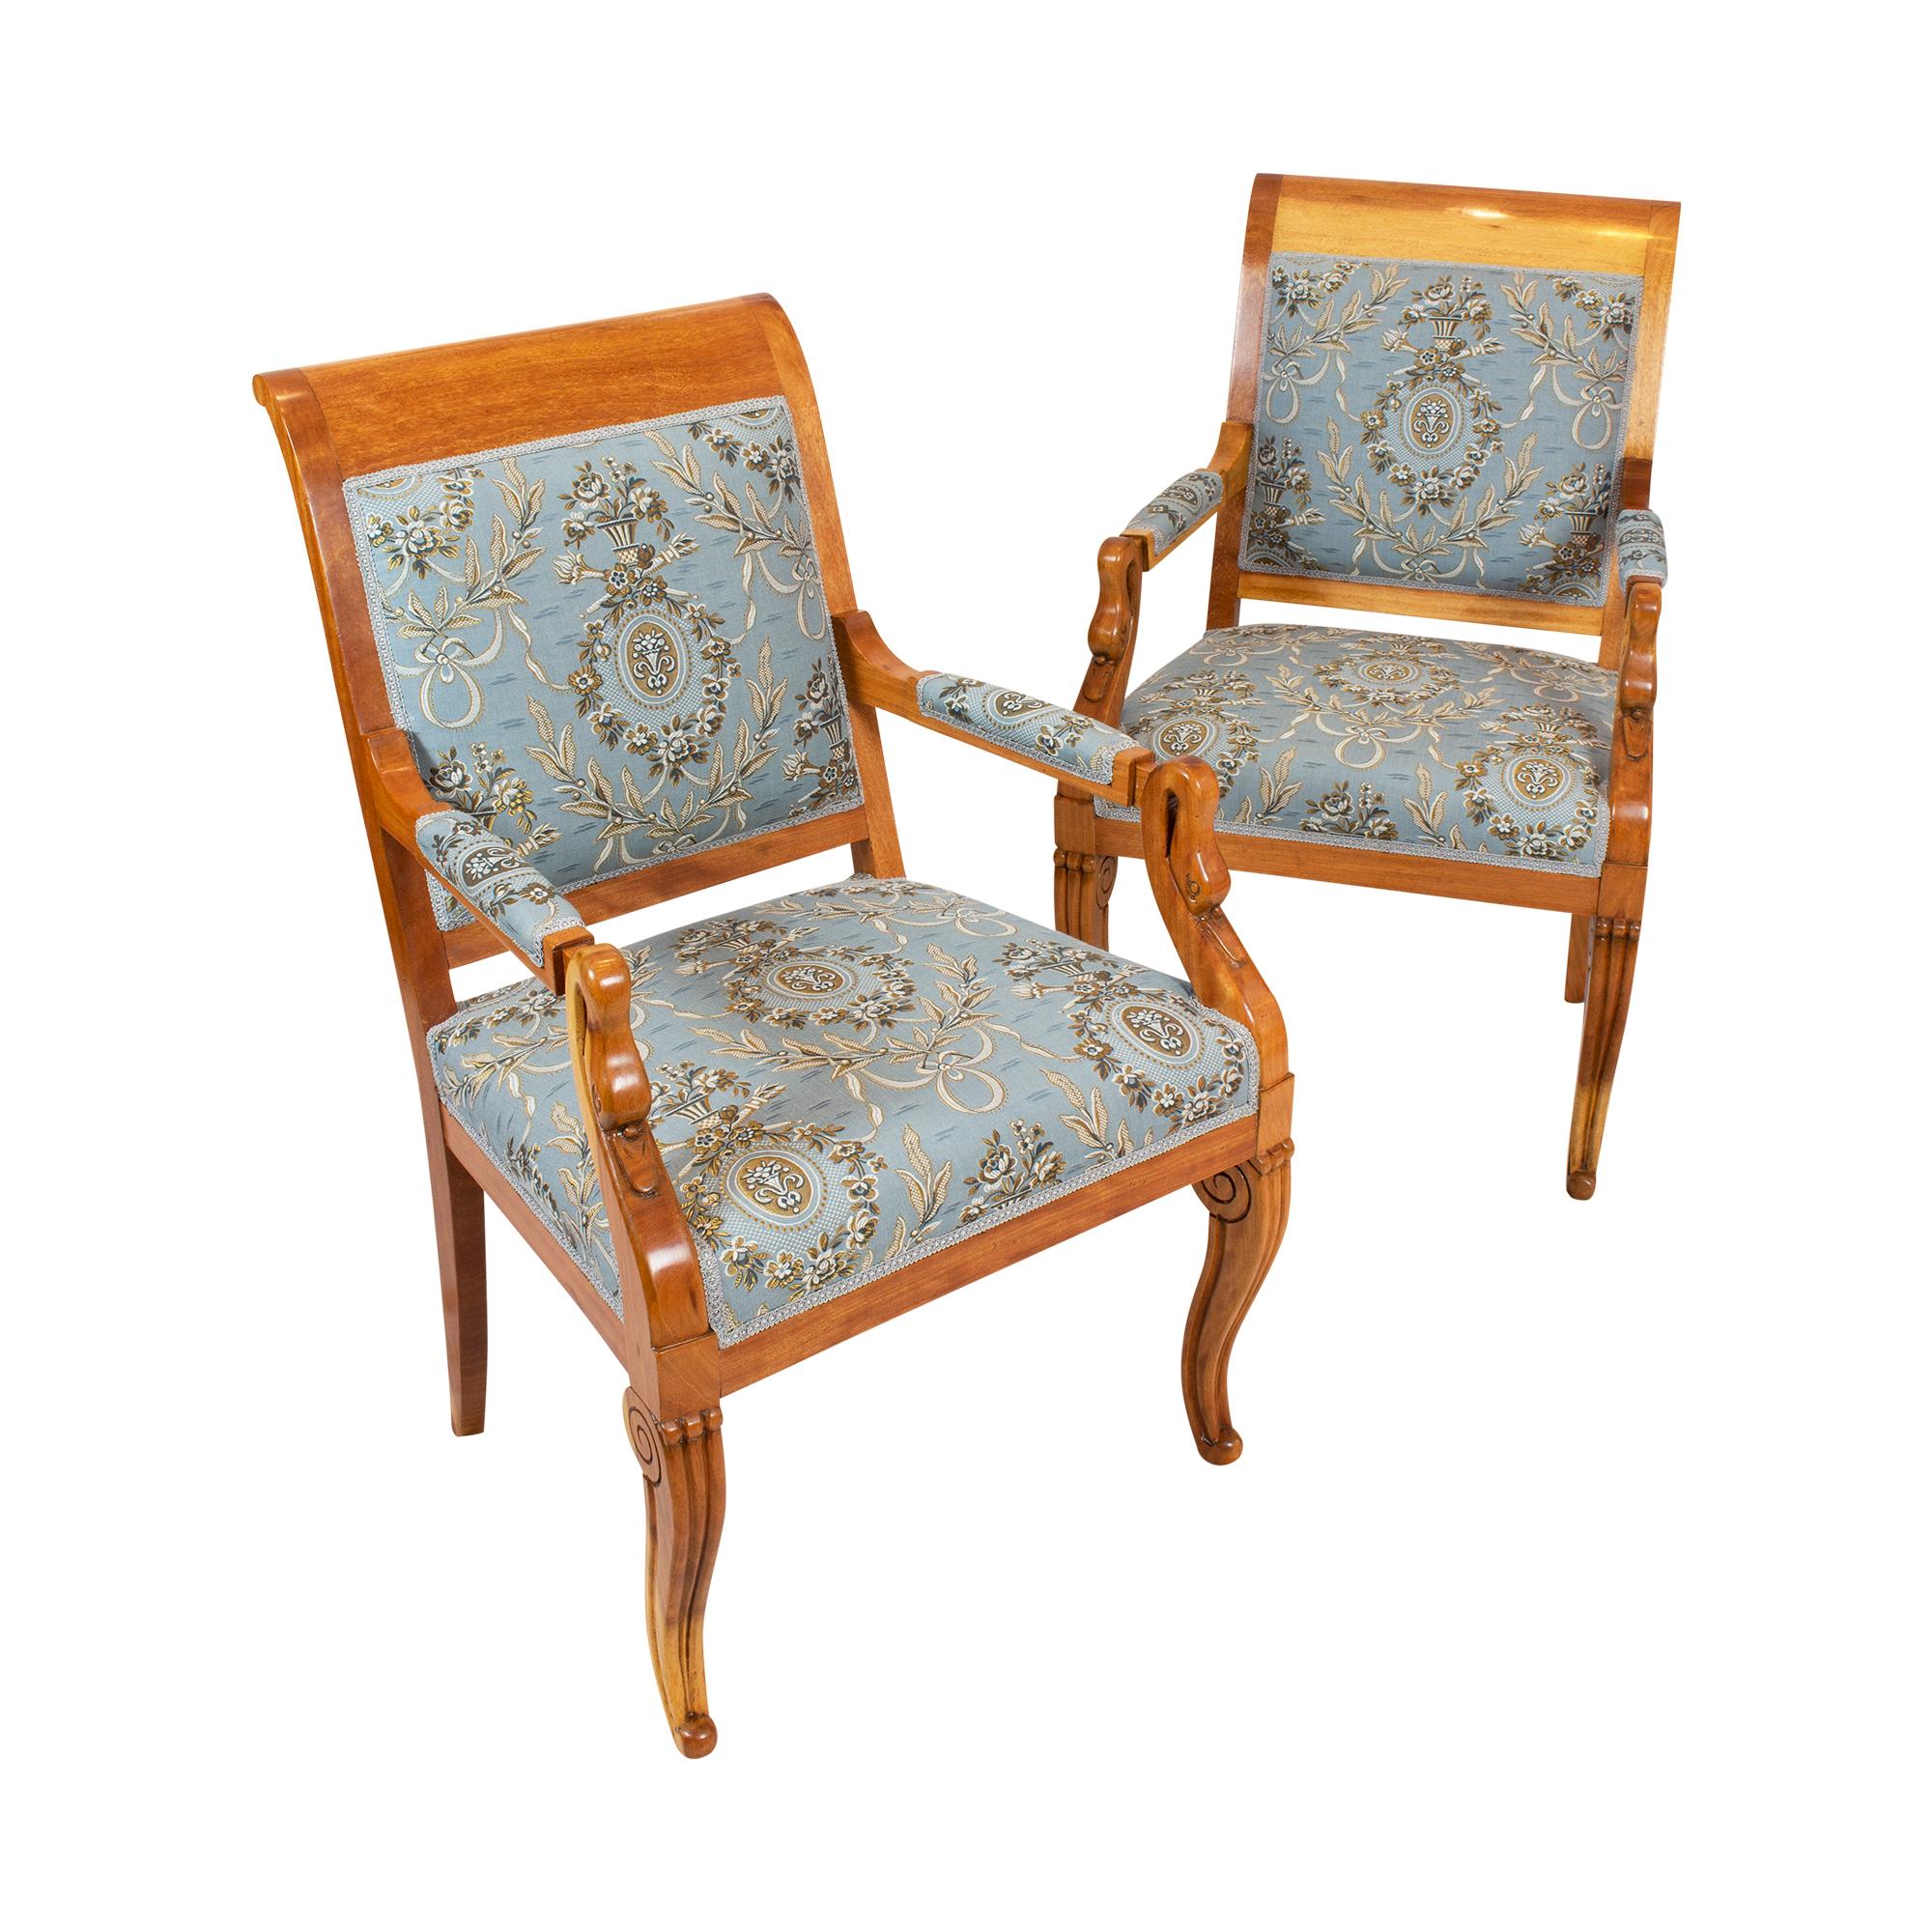 A pair of Empire / Biedermeier plum wood from circa 1815, newly upholstered with new fabric in classicist style. The armrests, backrest and seat are upholstered. The upholstery fabric is with gold threads so that the optic is dreamlike. The armrests